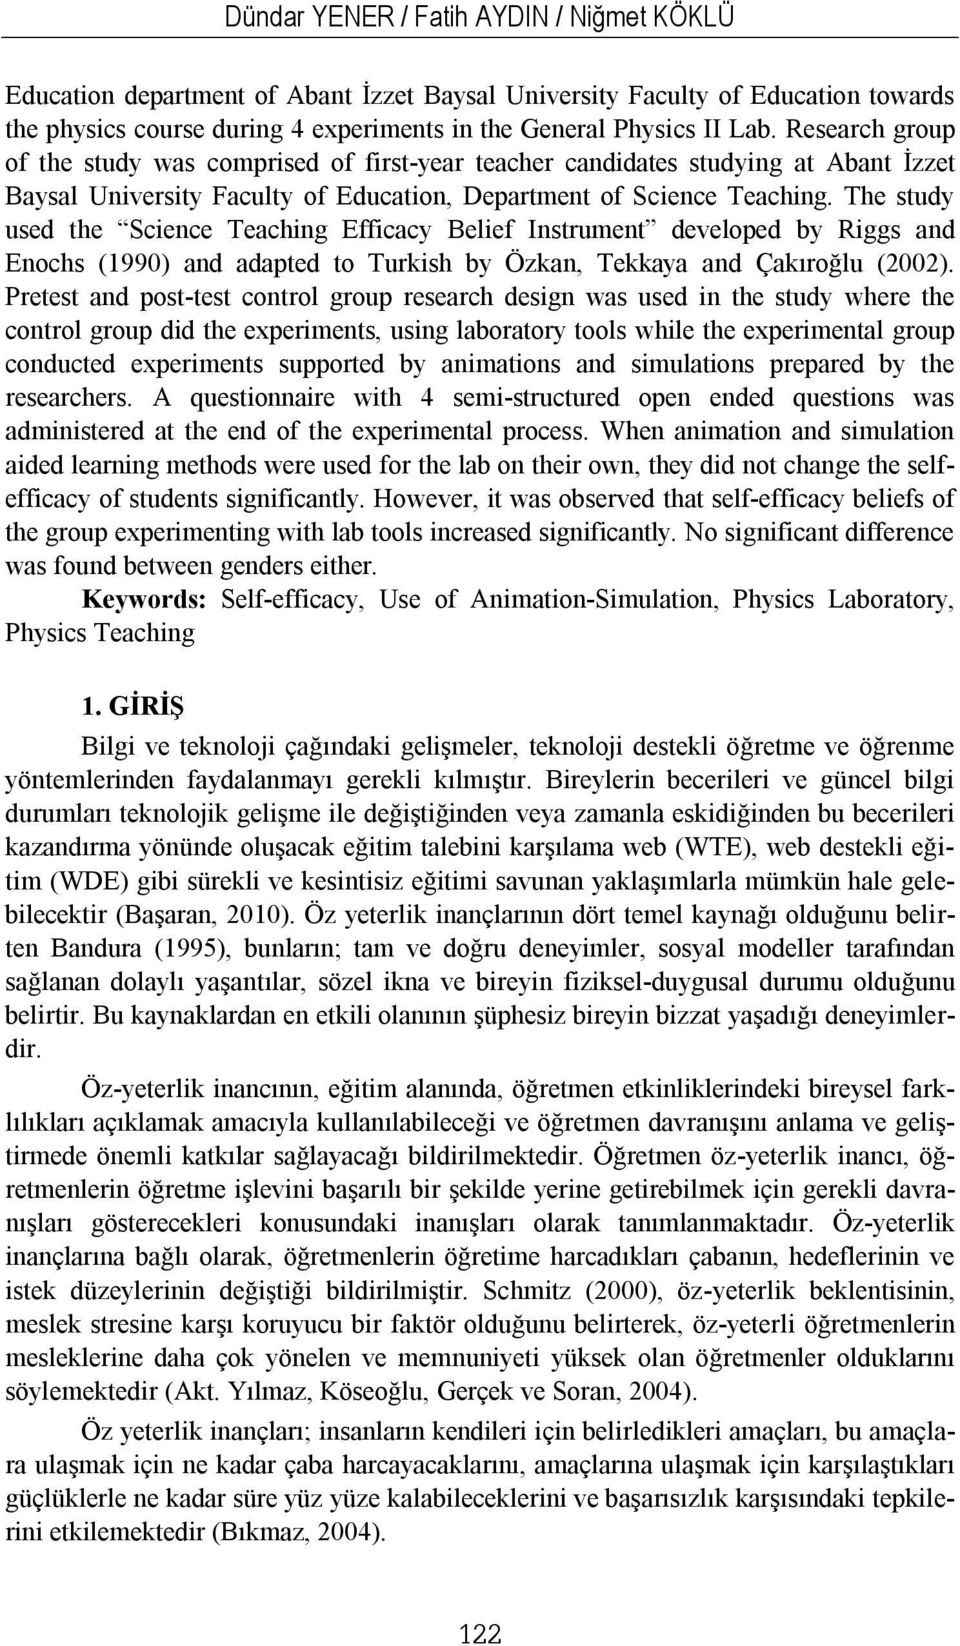 The study used the Science Teaching Efficacy Belief Instrument developed by Riggs and Enochs (1990) and adapted to Turkish by Özkan, Tekkaya and Çakıroğlu (2002).